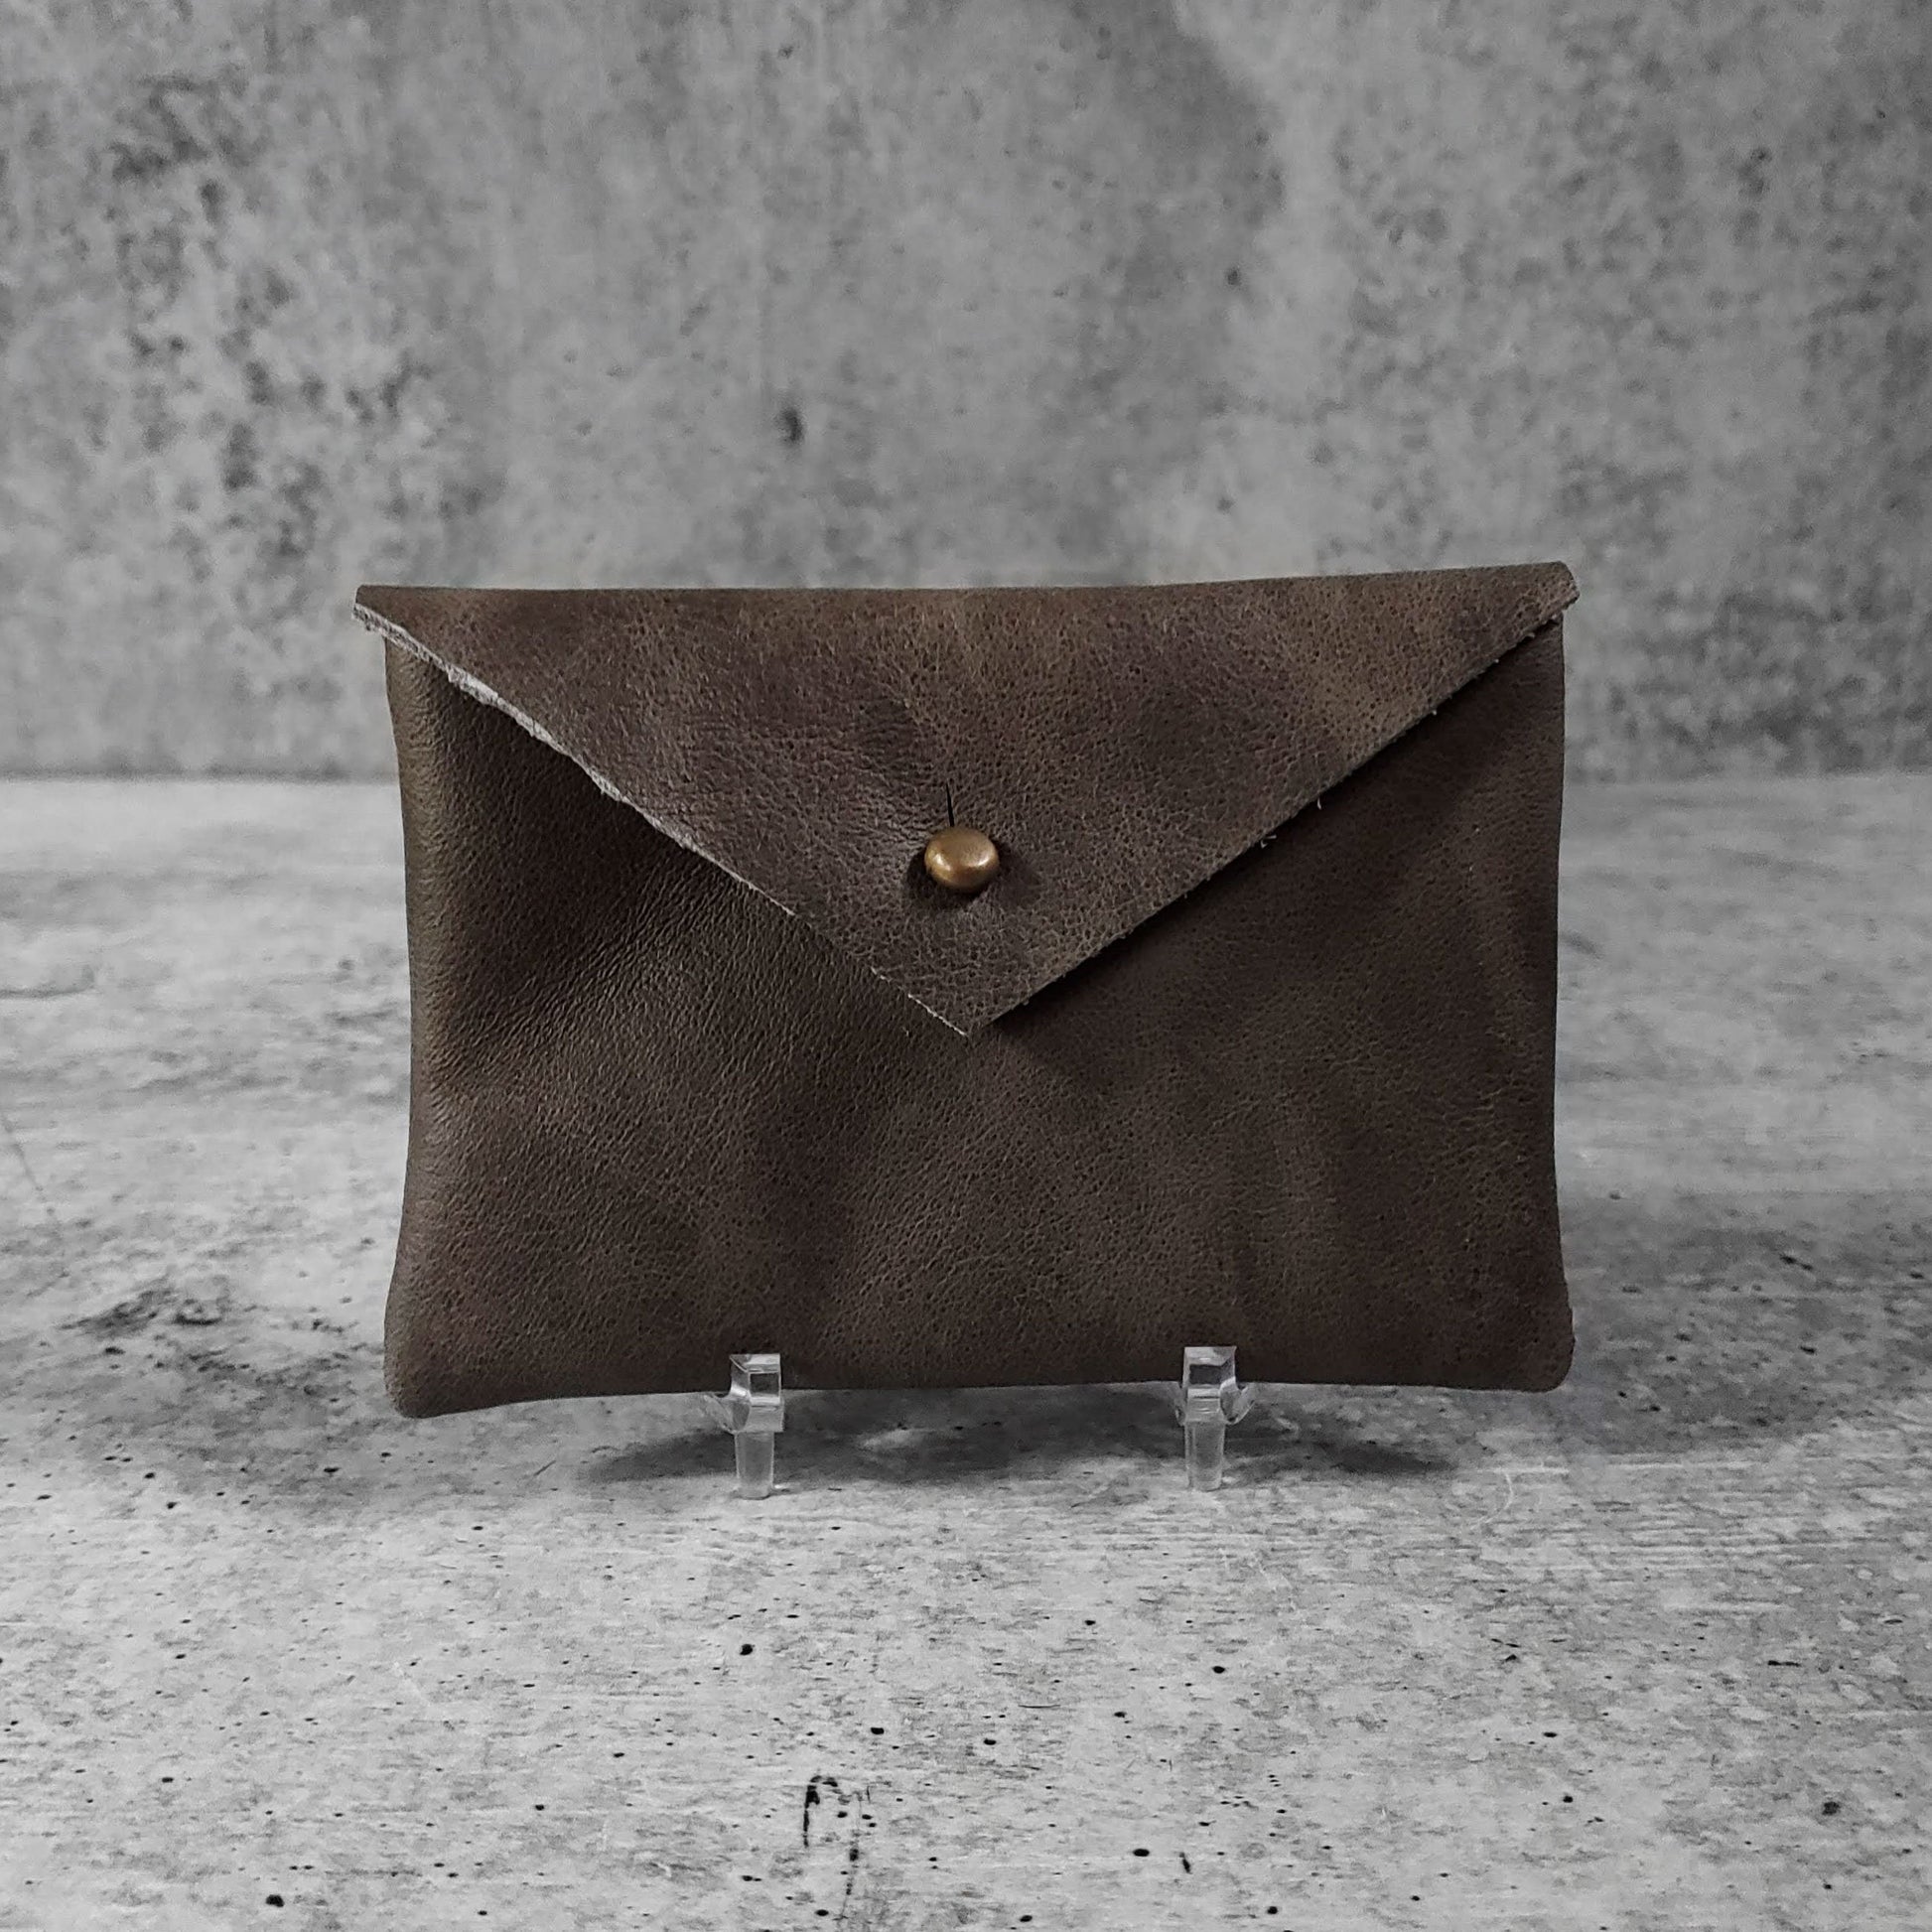 Front facing view of "smooth soft leather card holder" in iron against a concrete background.